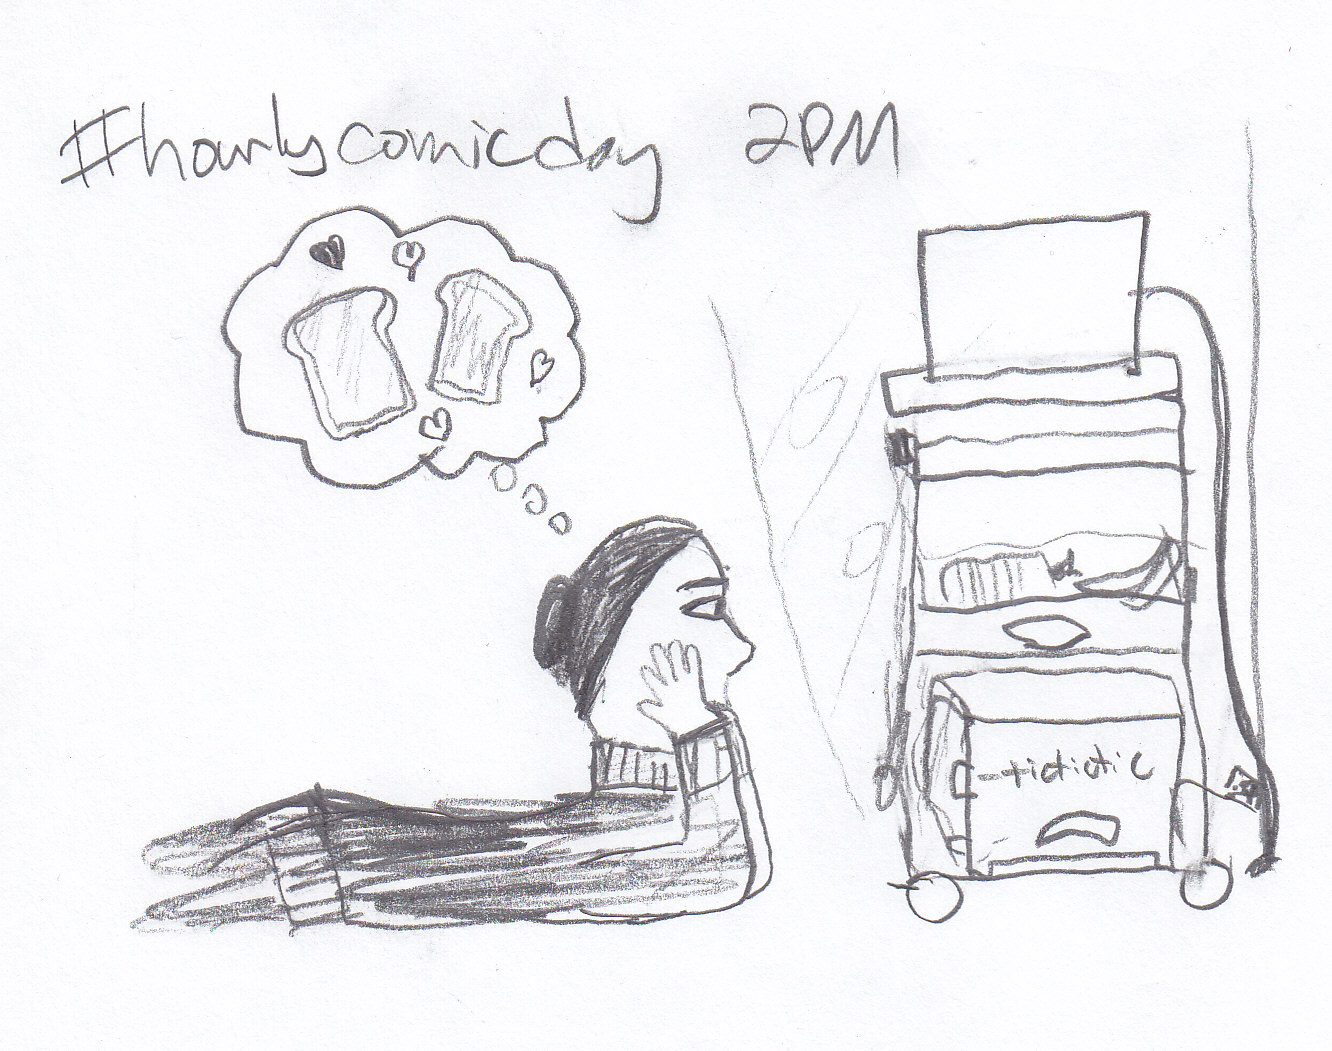 '#hourlycomicday 2 PM' at the top, me lying on my stomach with my chin resting on my hand as I stare at a toaster on a bottom shelf of a kitchen cart that's going 'tictictic'. I have a thought bubble with piece of toast and hearts in it.